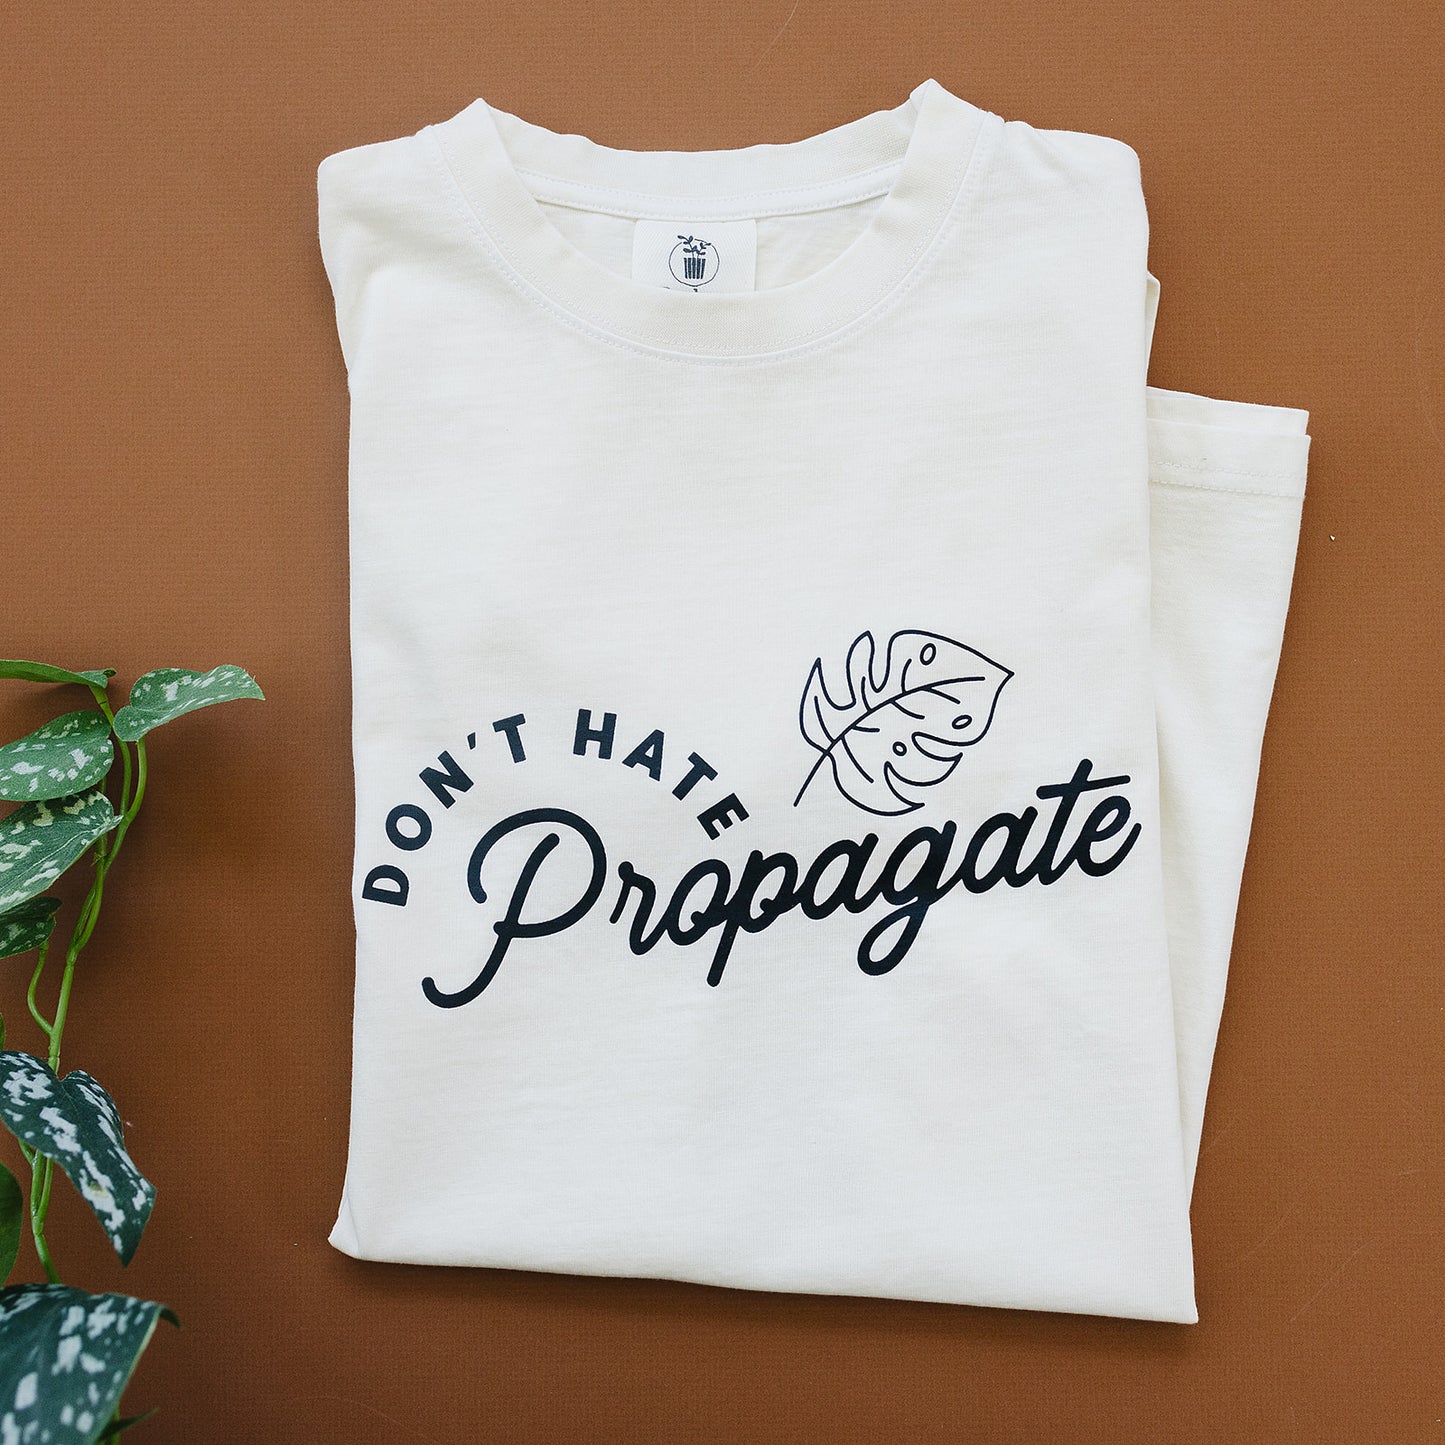 "Don't Hate, Propagate" Graphic T-Shirt